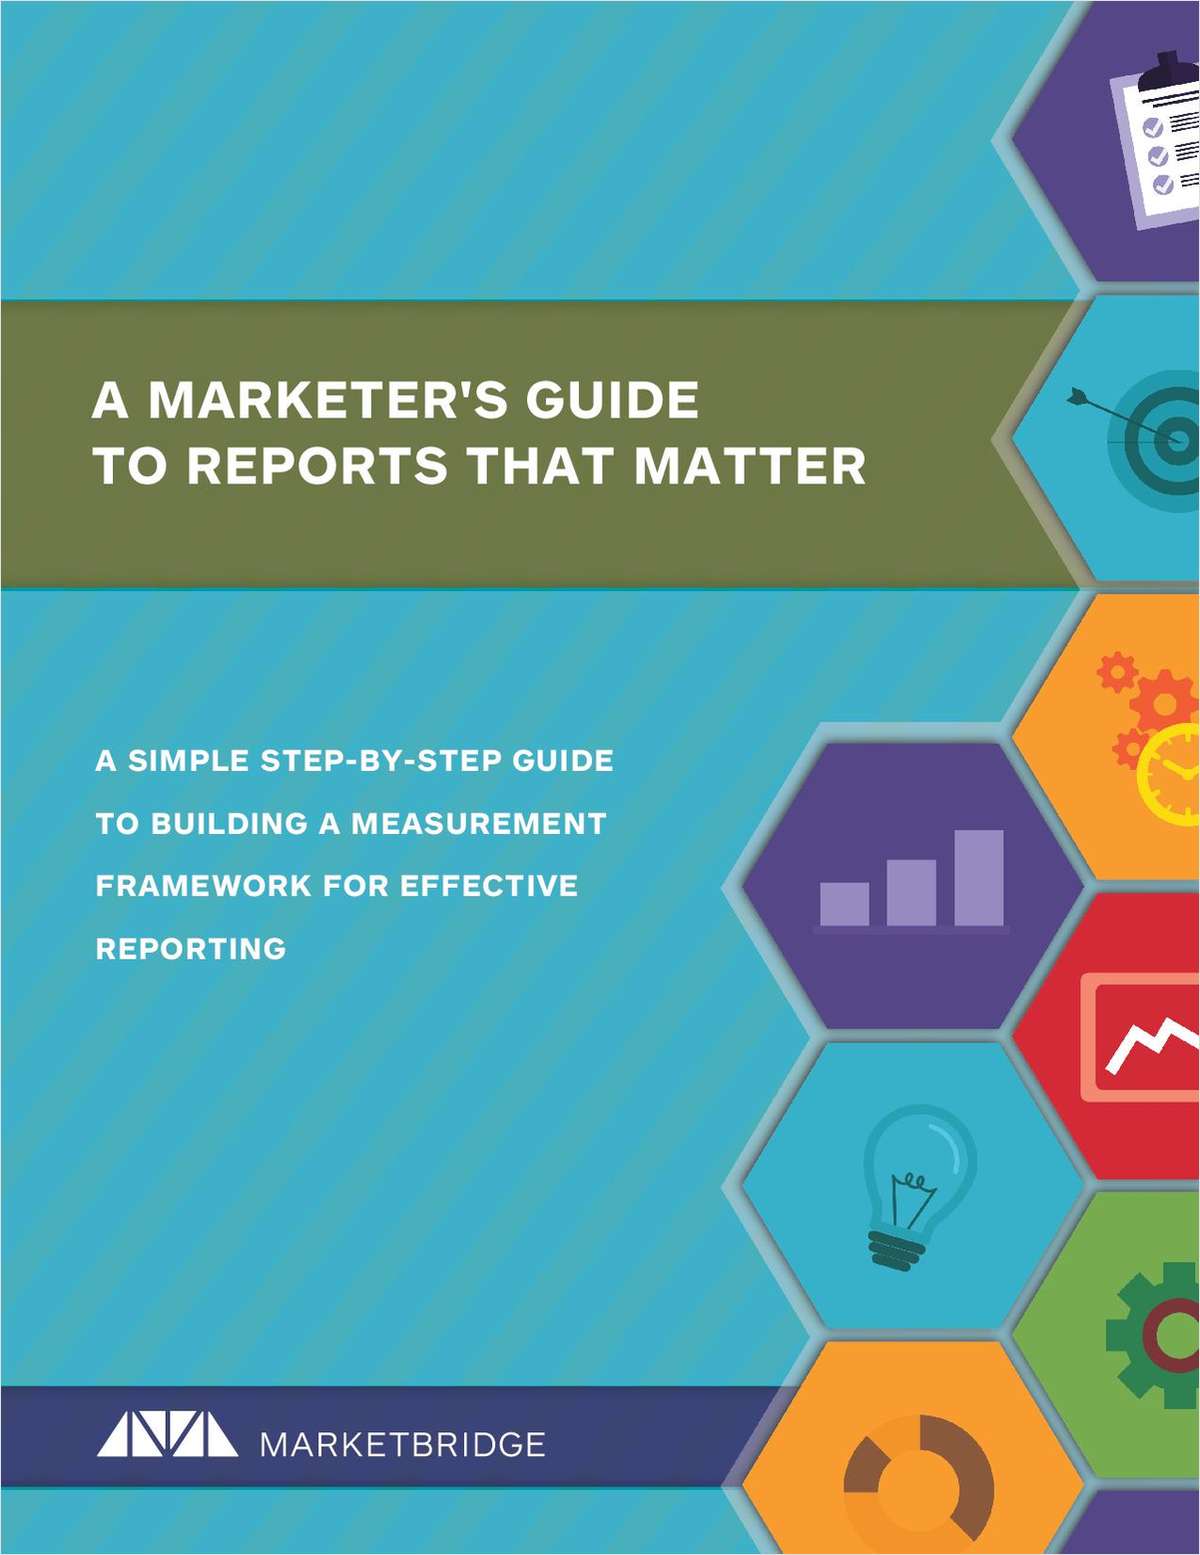 Marketer's Guide to Reports That Matter